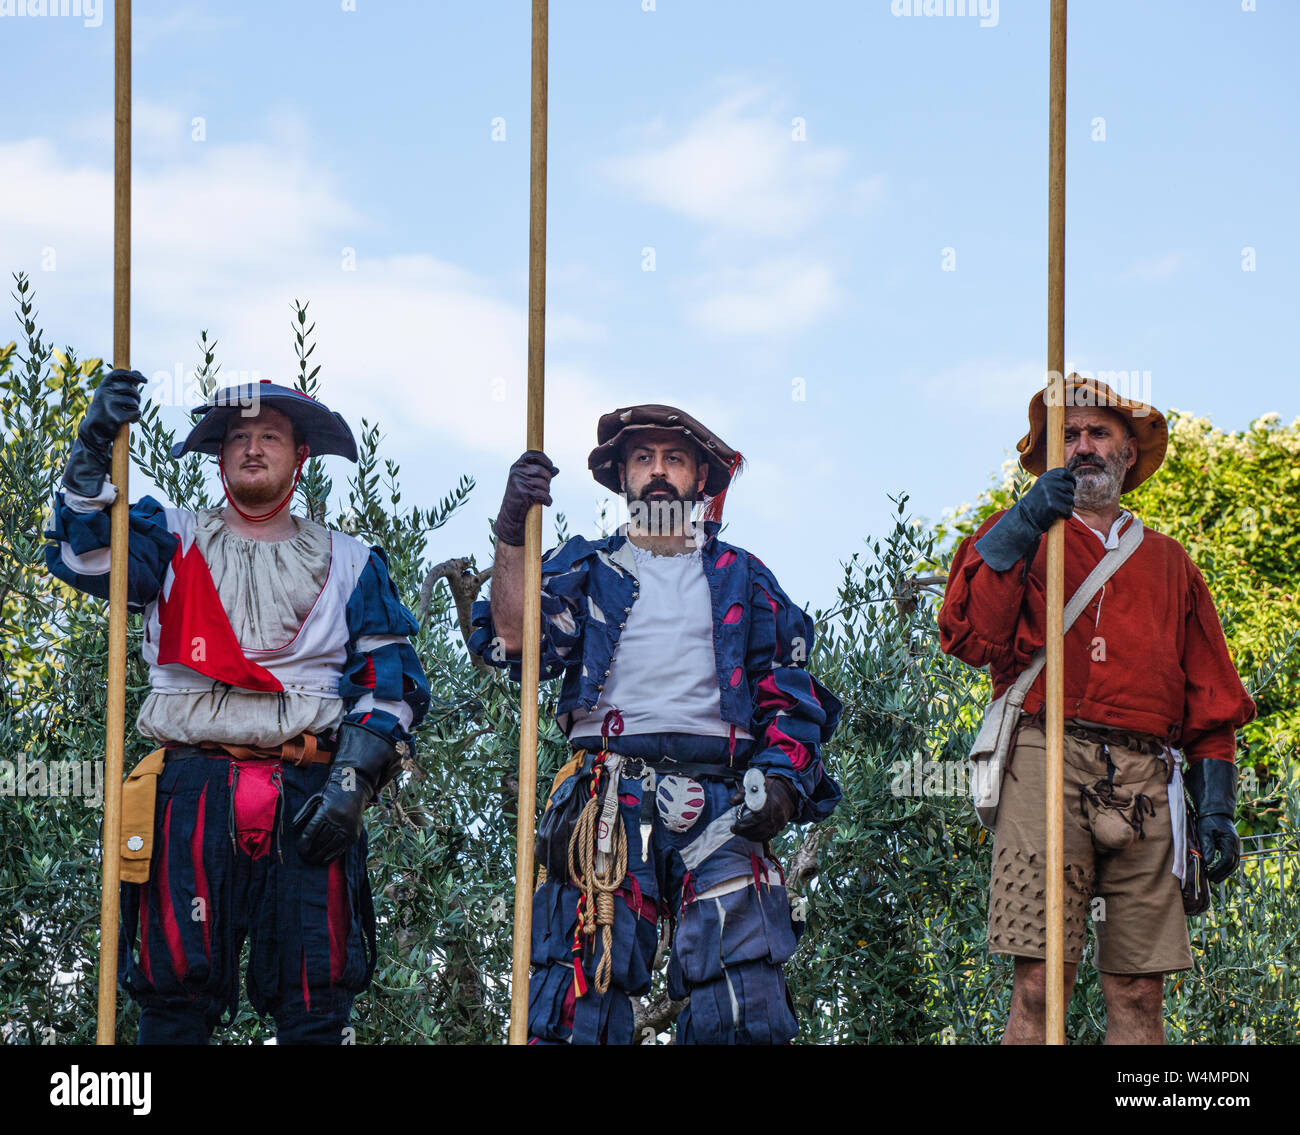 Three local actors in Renaissance costume and carrying lances waiting to take part in the summer festival in a small town in Italy. Stock Photo